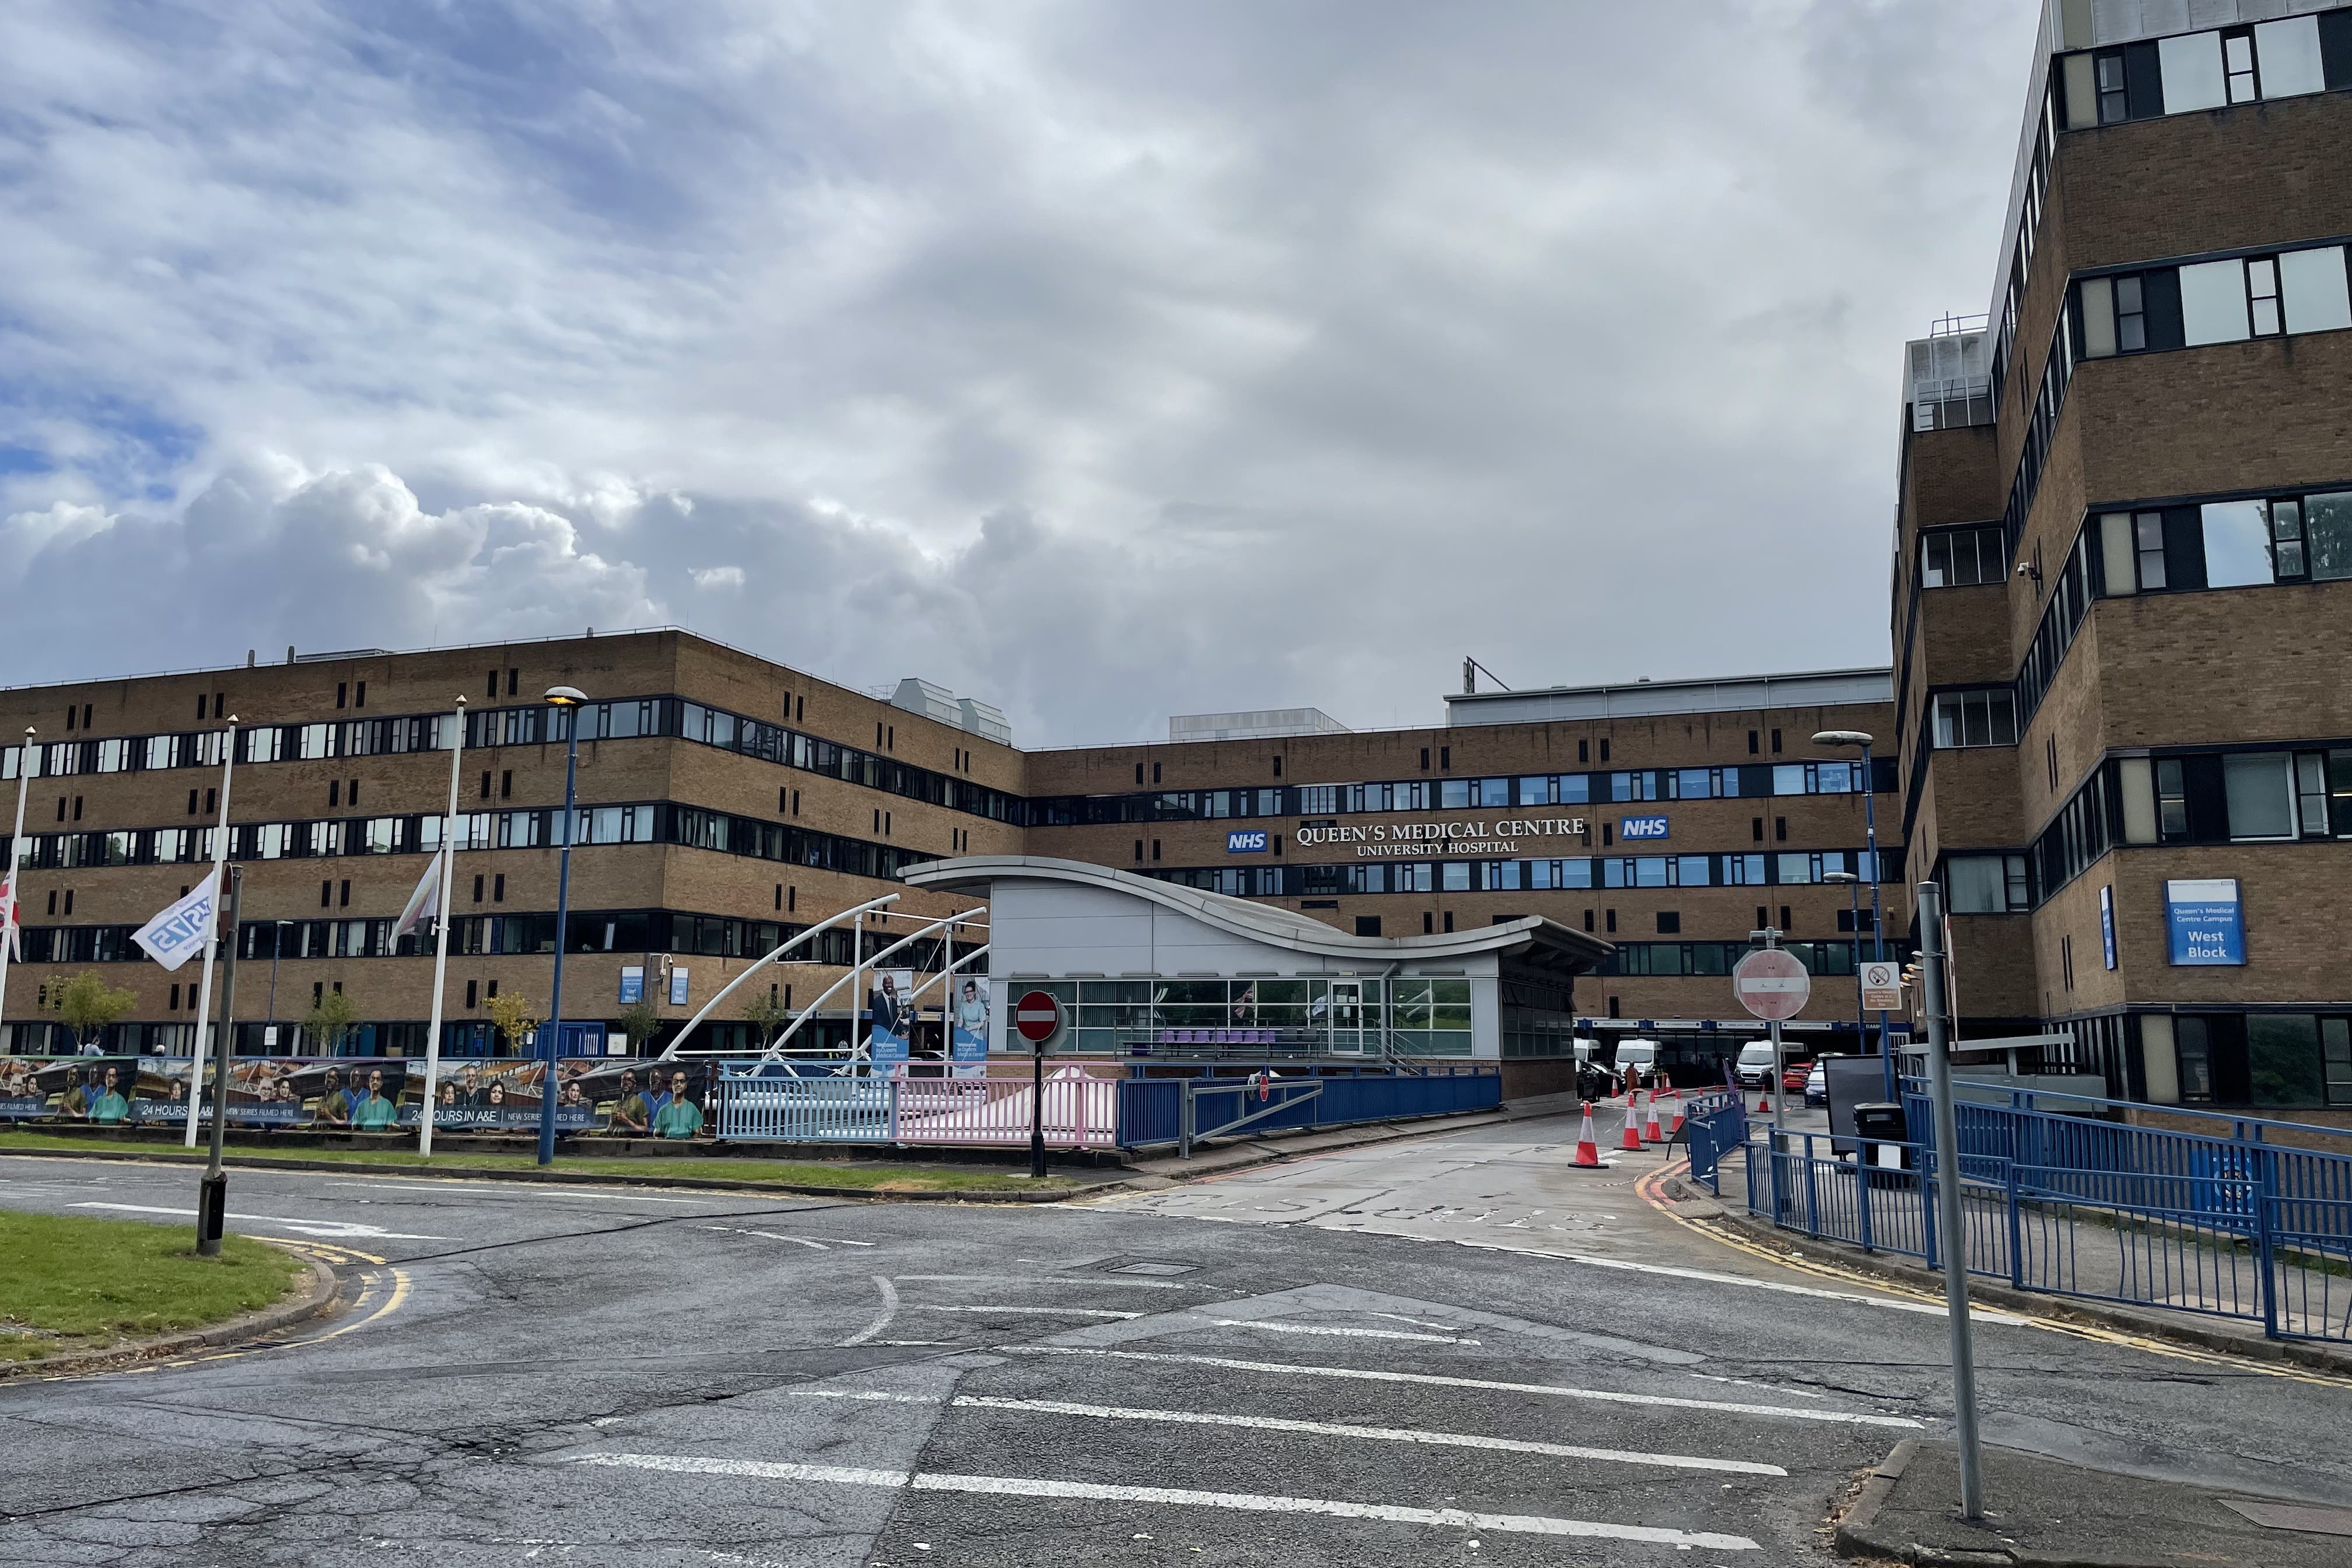 Nottingham University Hospitals NHS Trust, which operates Queen’s Medical Centre, has launched an investigation into the incident